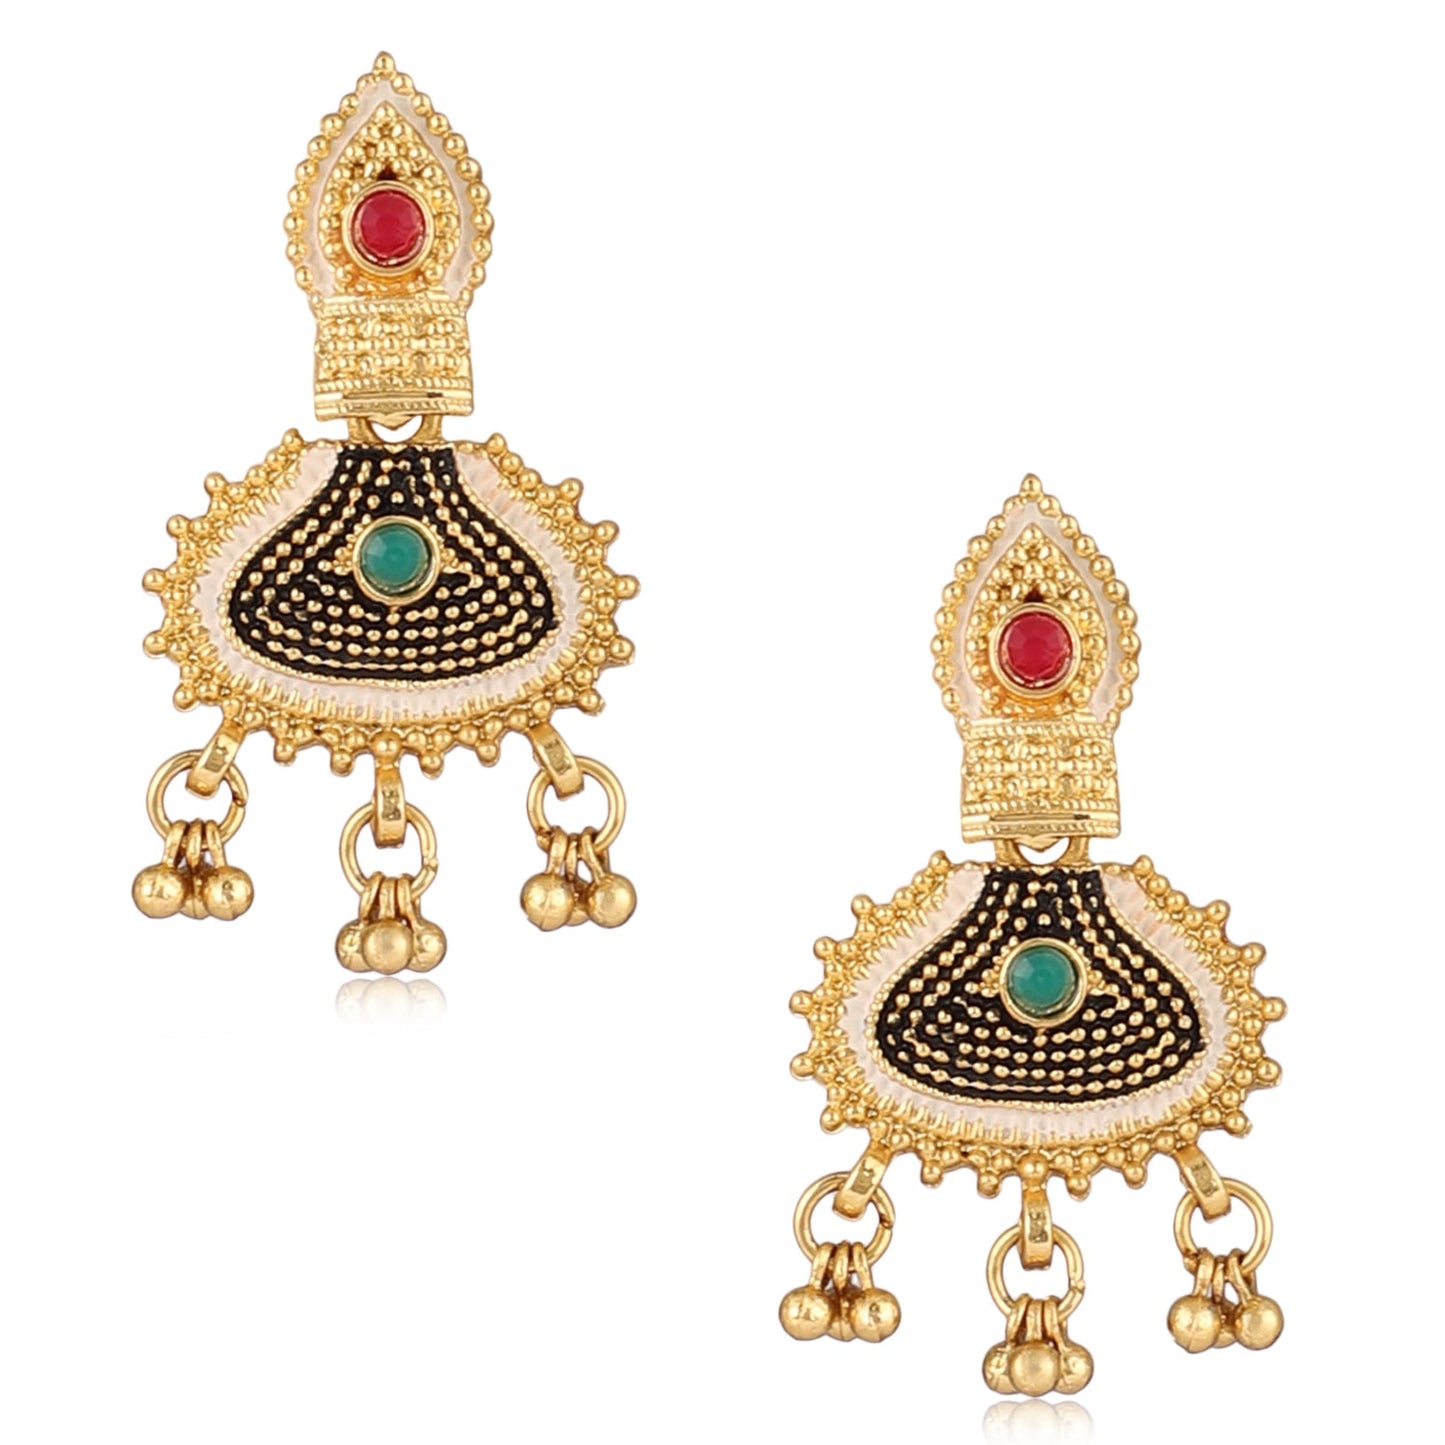 Mekkna Women's Pride Gold Plated Mangalsutra with Earrings | Buy This Jewellery Online from Mekkna.